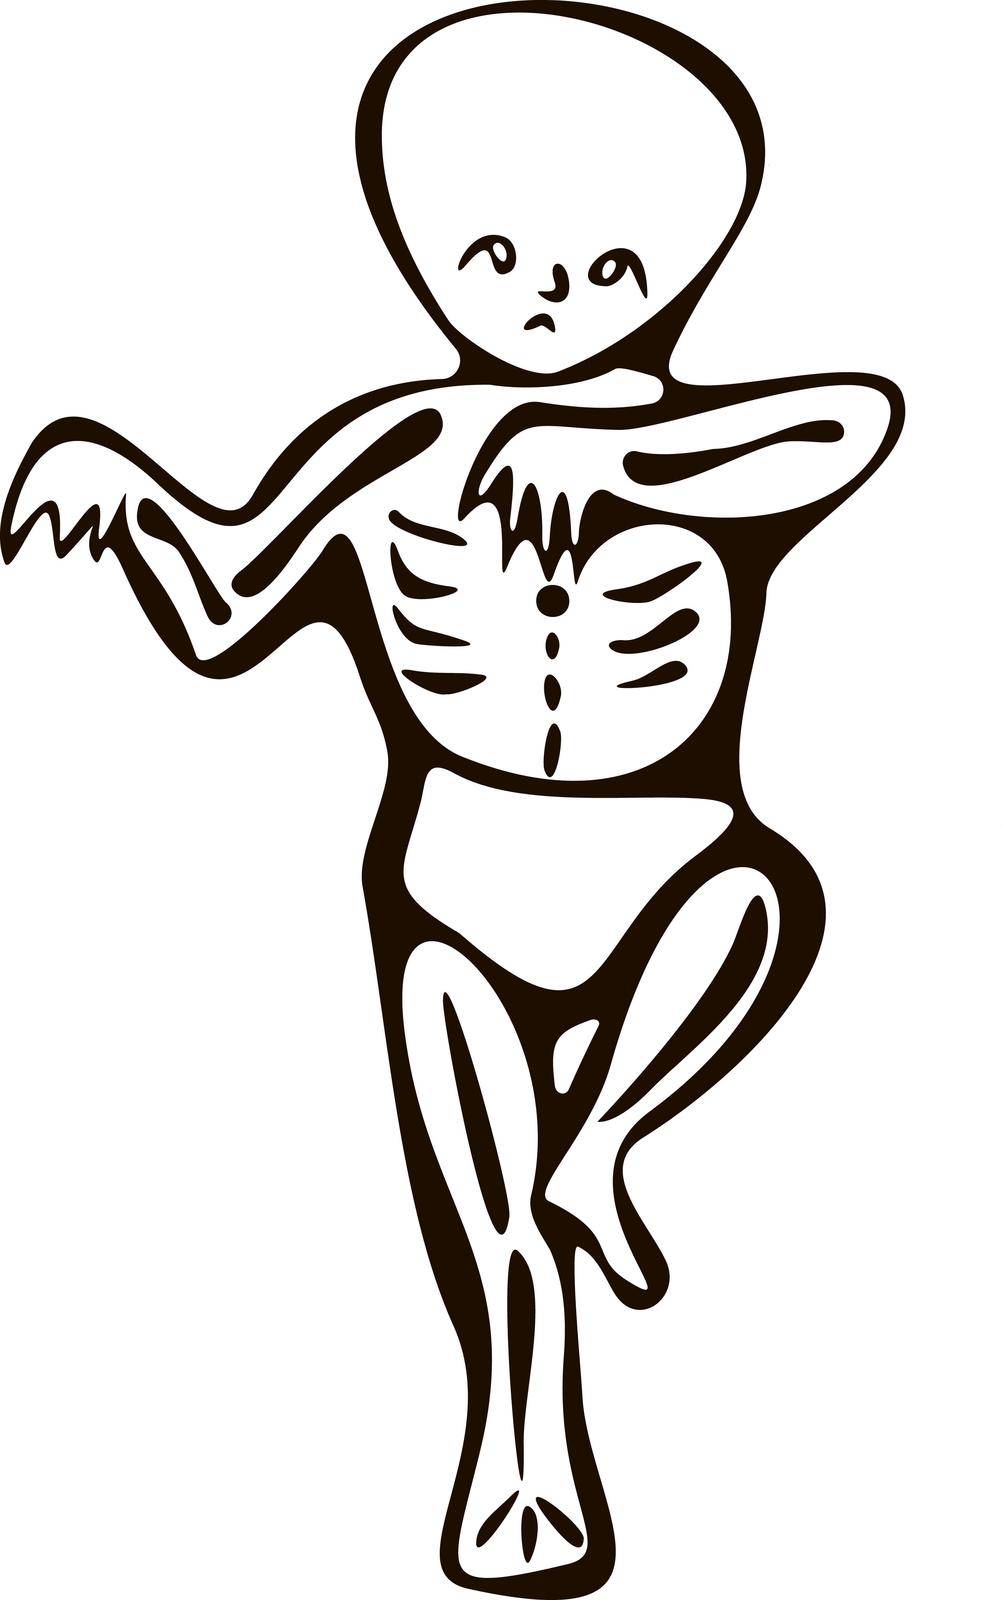 Children baby in Halloween skeleton costumes. a small child in a cute skeleton costume sad standing on one leg. funny cute baby cartoons. Vector illustration